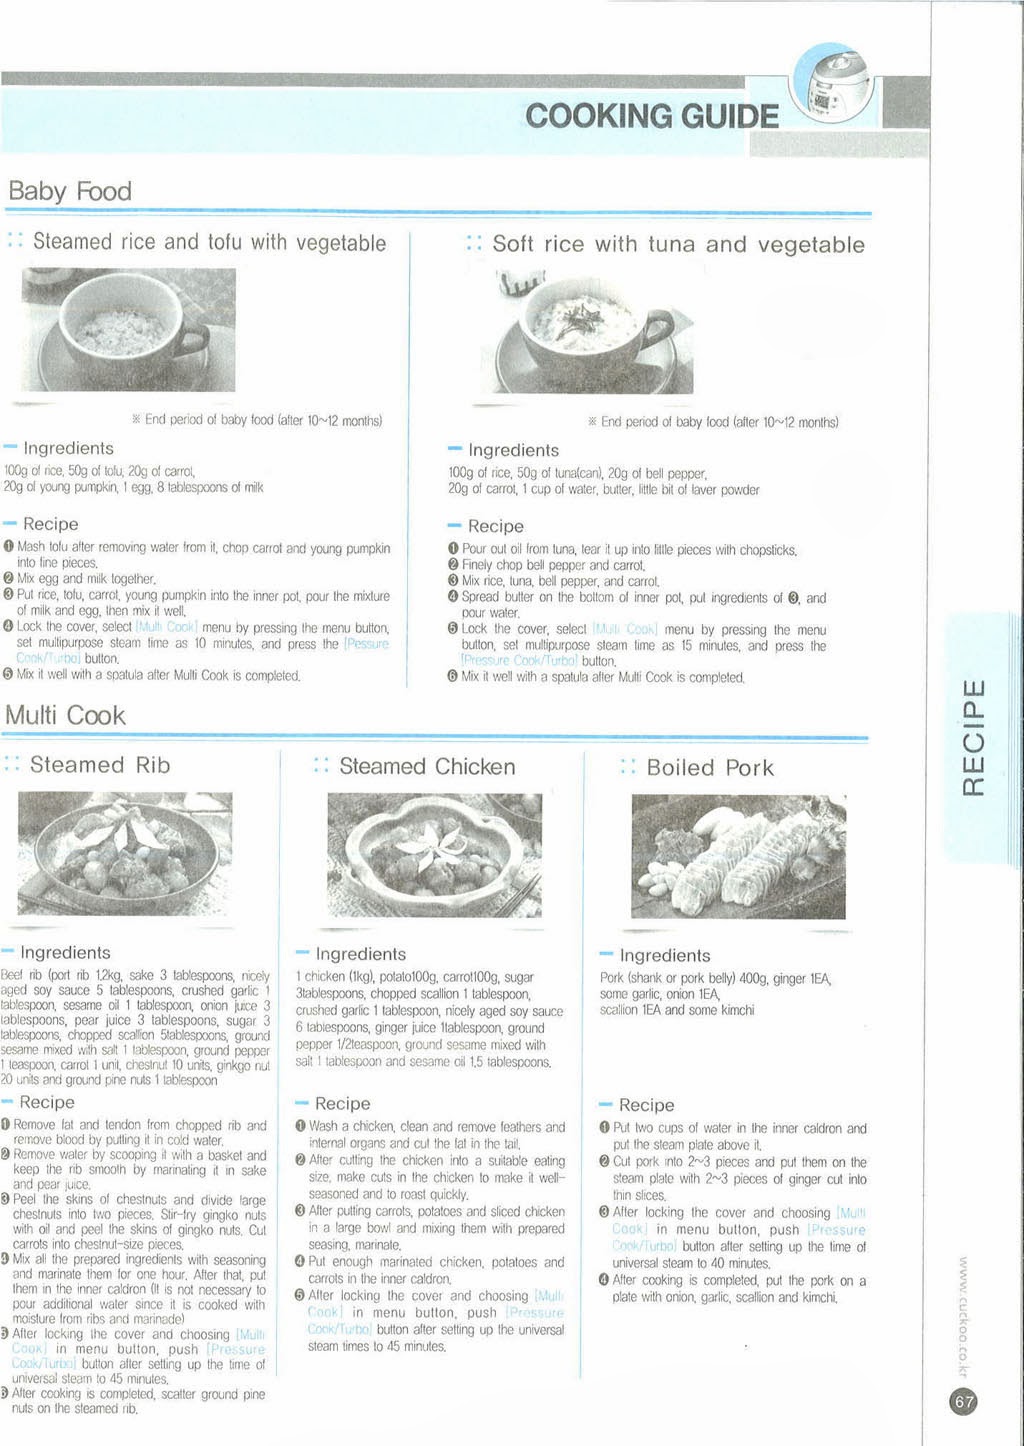 My Cuckoo Rice Cooker: Scanned Cuckoo English Recipe and Cooking Guide ...